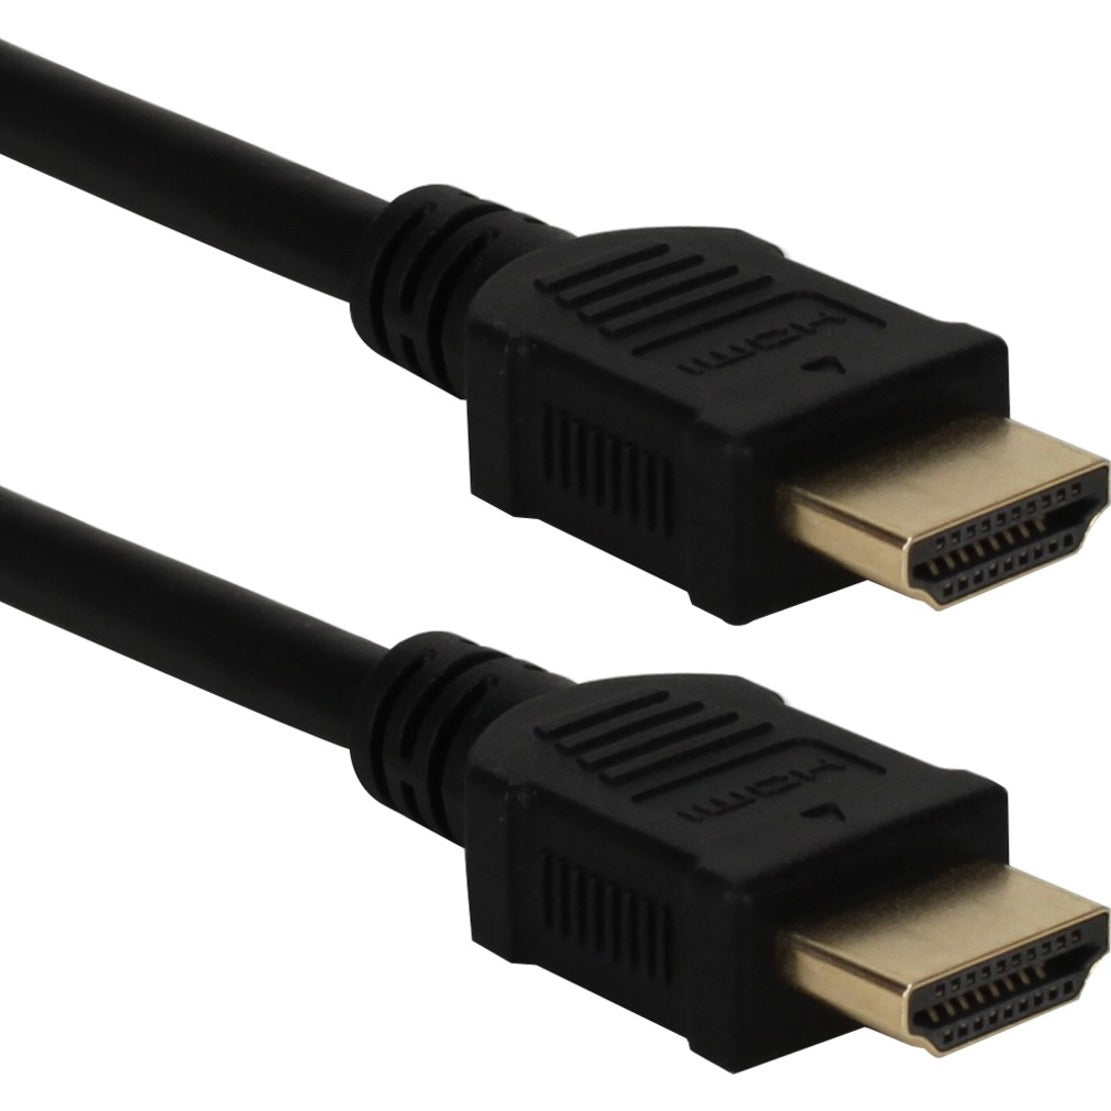 QVS HDG-1MC 1-Meter High Speed HDMI UltraHD 4K with Ethernet Cable, Audio Return Channel (ARC), Corrosion Resistant